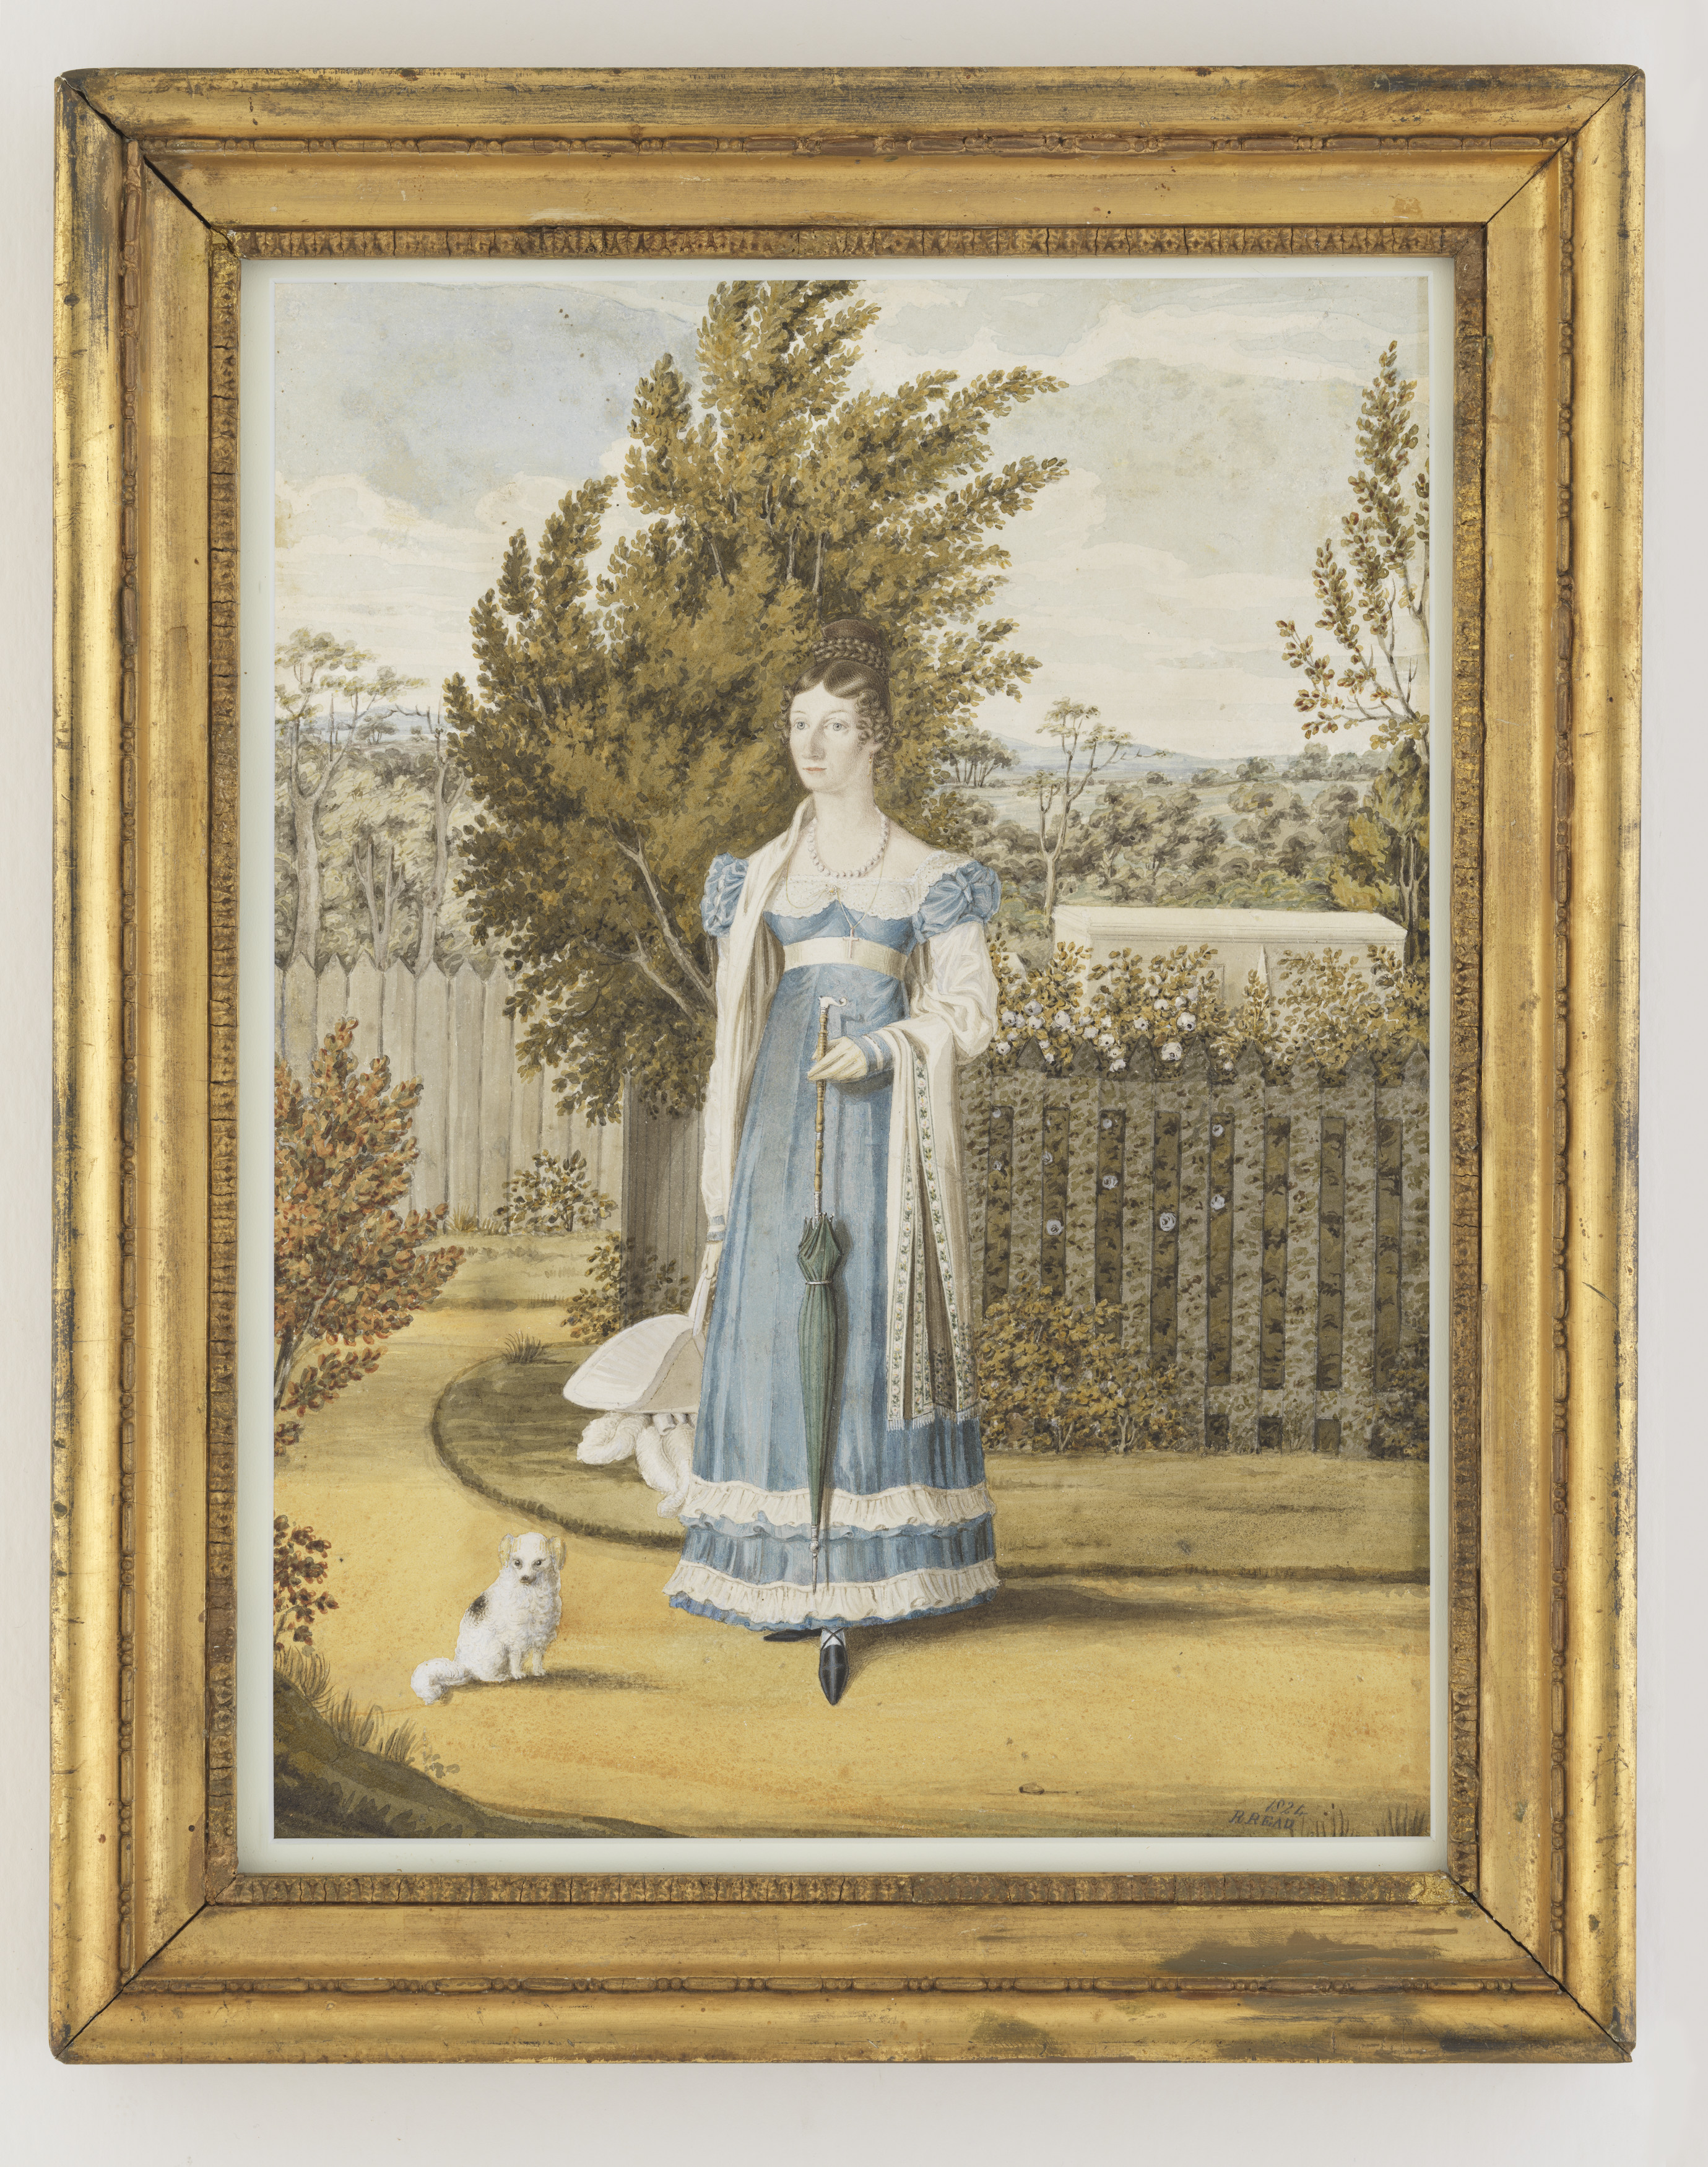 Painting of a woman in colonial dress standing in a garden with a small dog.